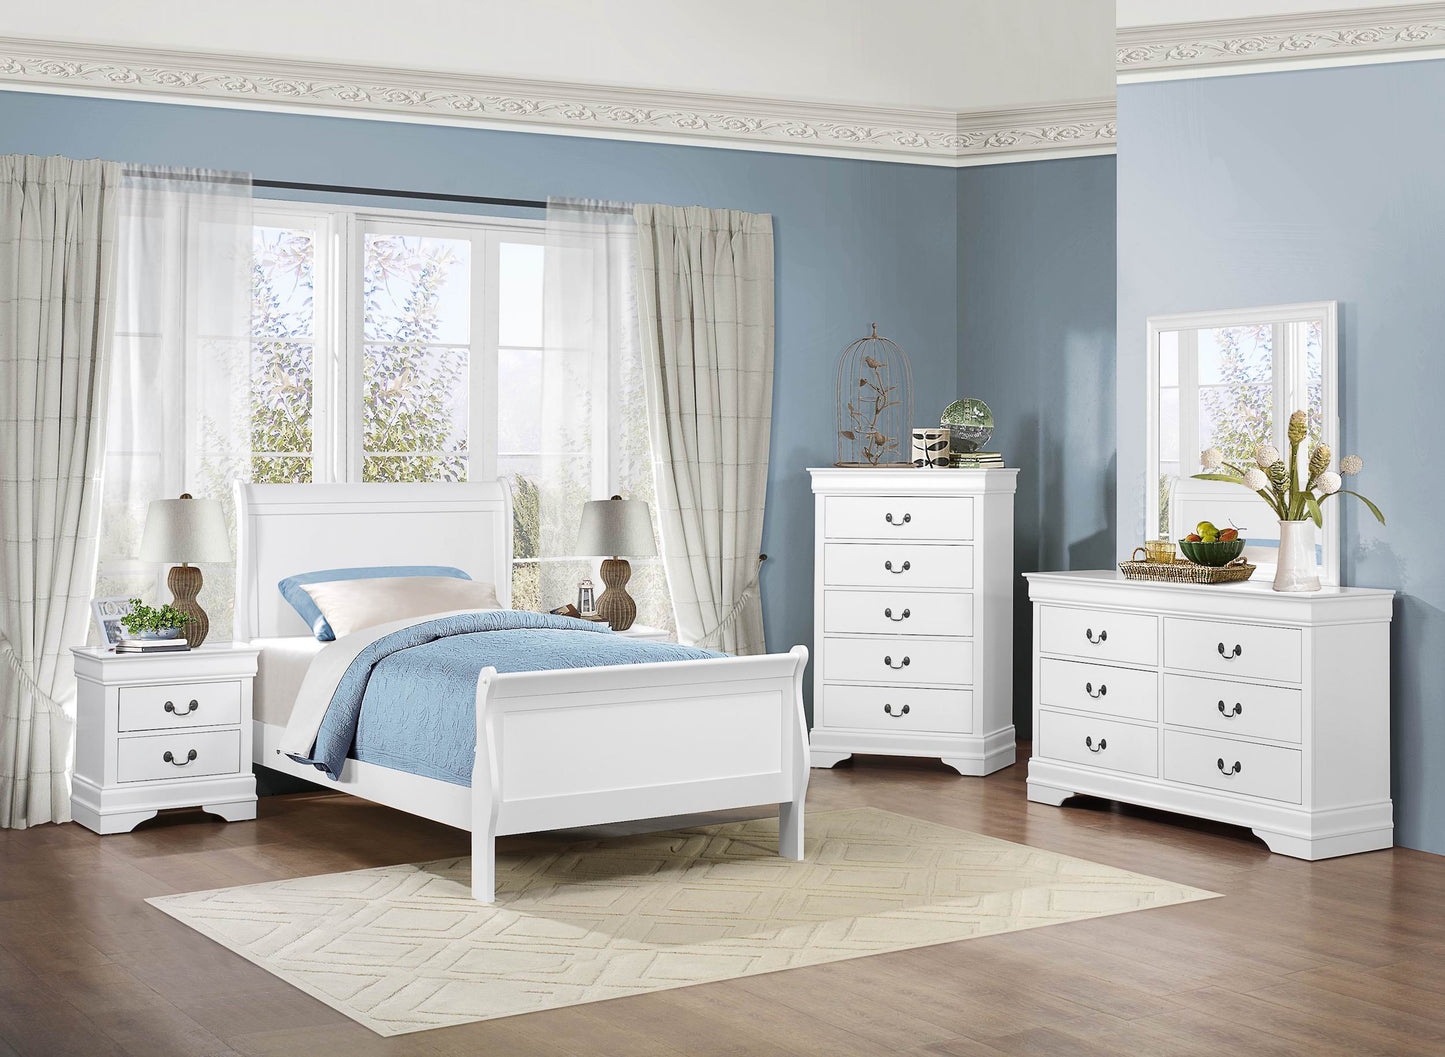 Manburg Louis Philippe 5PC Bedroom Set Twin Sleigh Bed, Dresser, Mirror, Nightstand, Chest in Burnished White